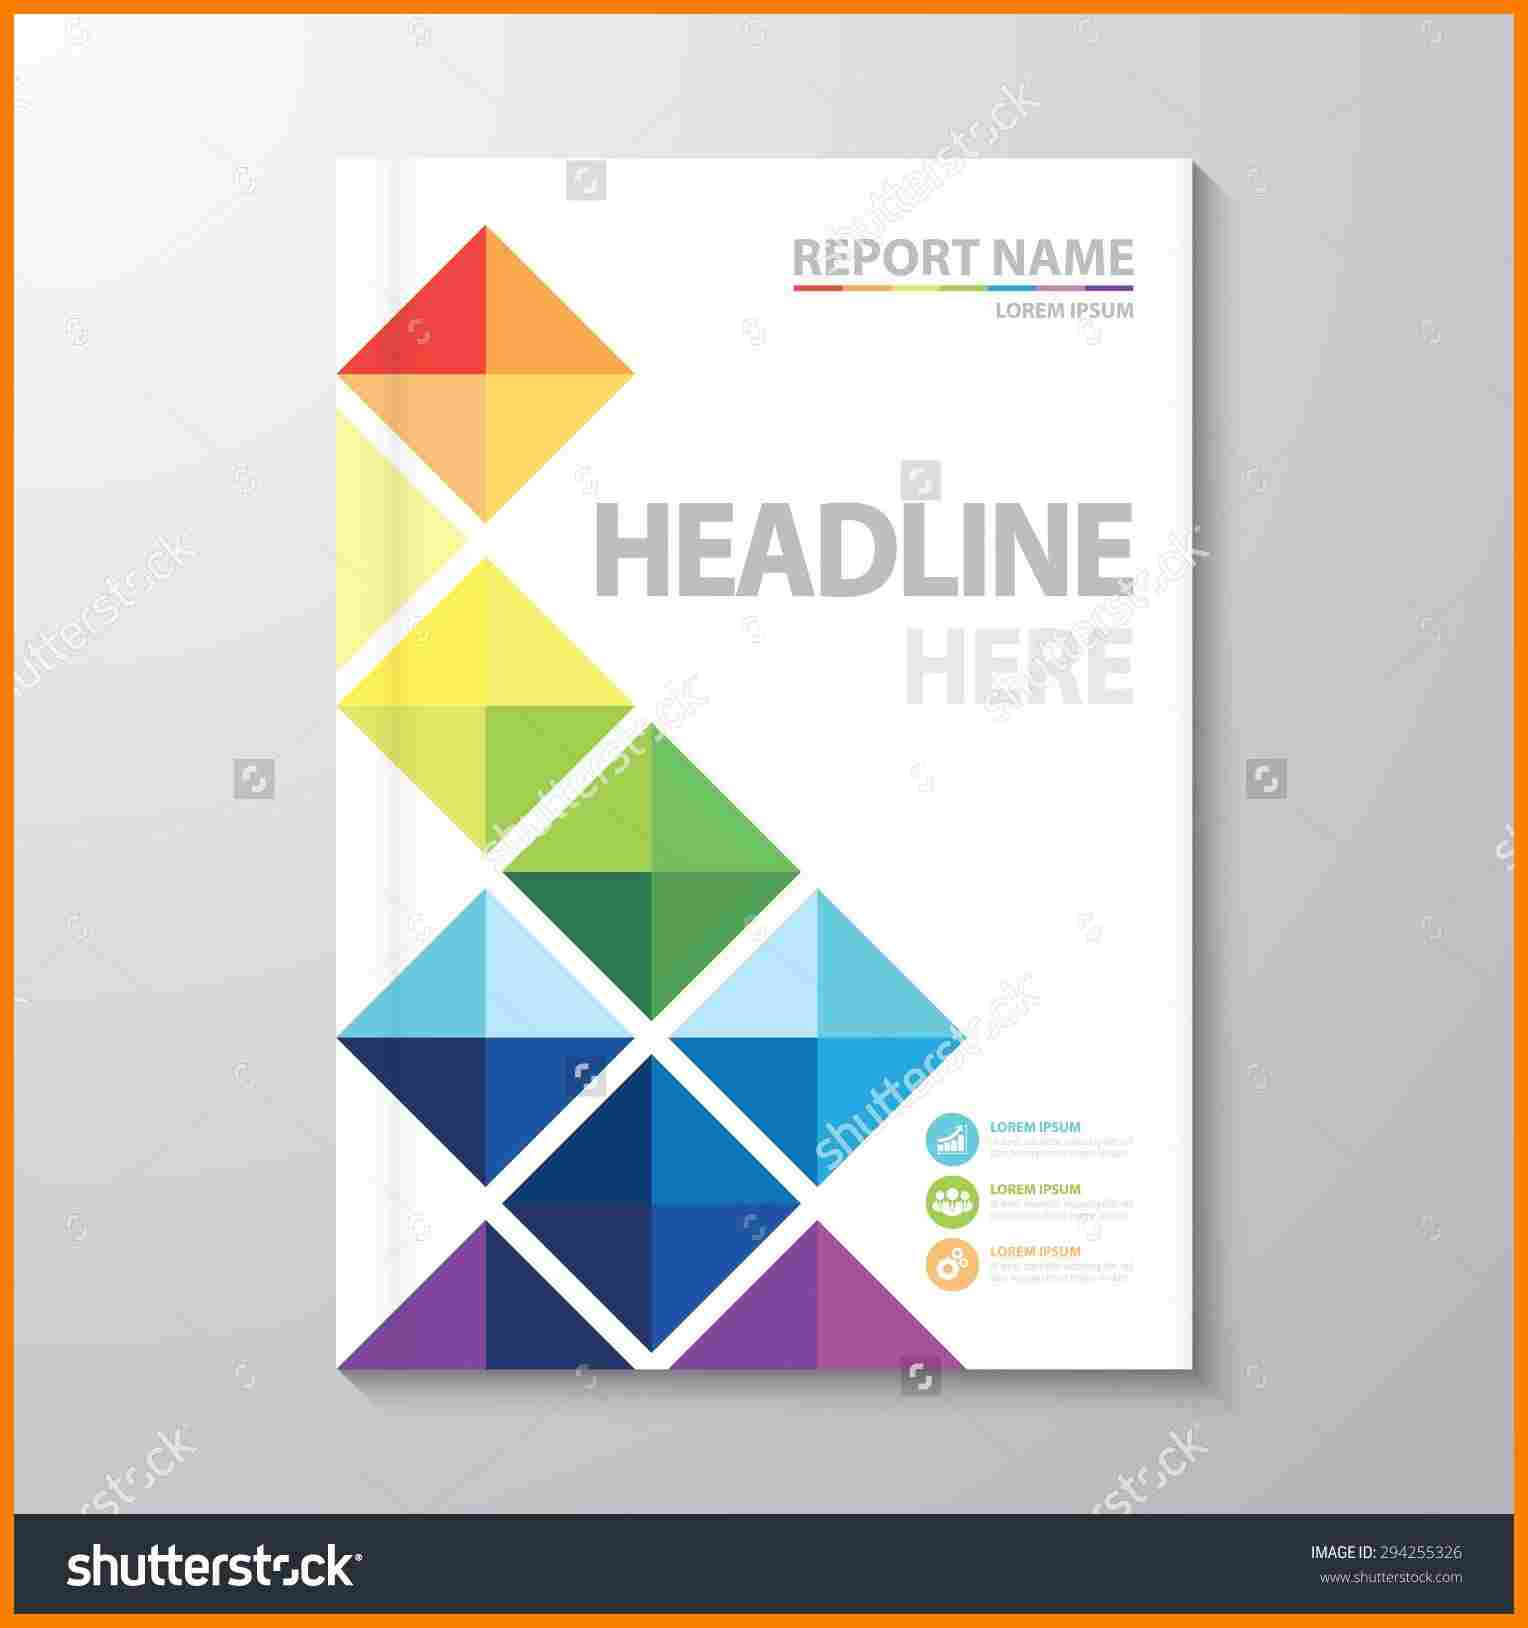 8+ Free Report Cover Page Template Download | Shrewd Investment Intended For Word Report Cover Page Template